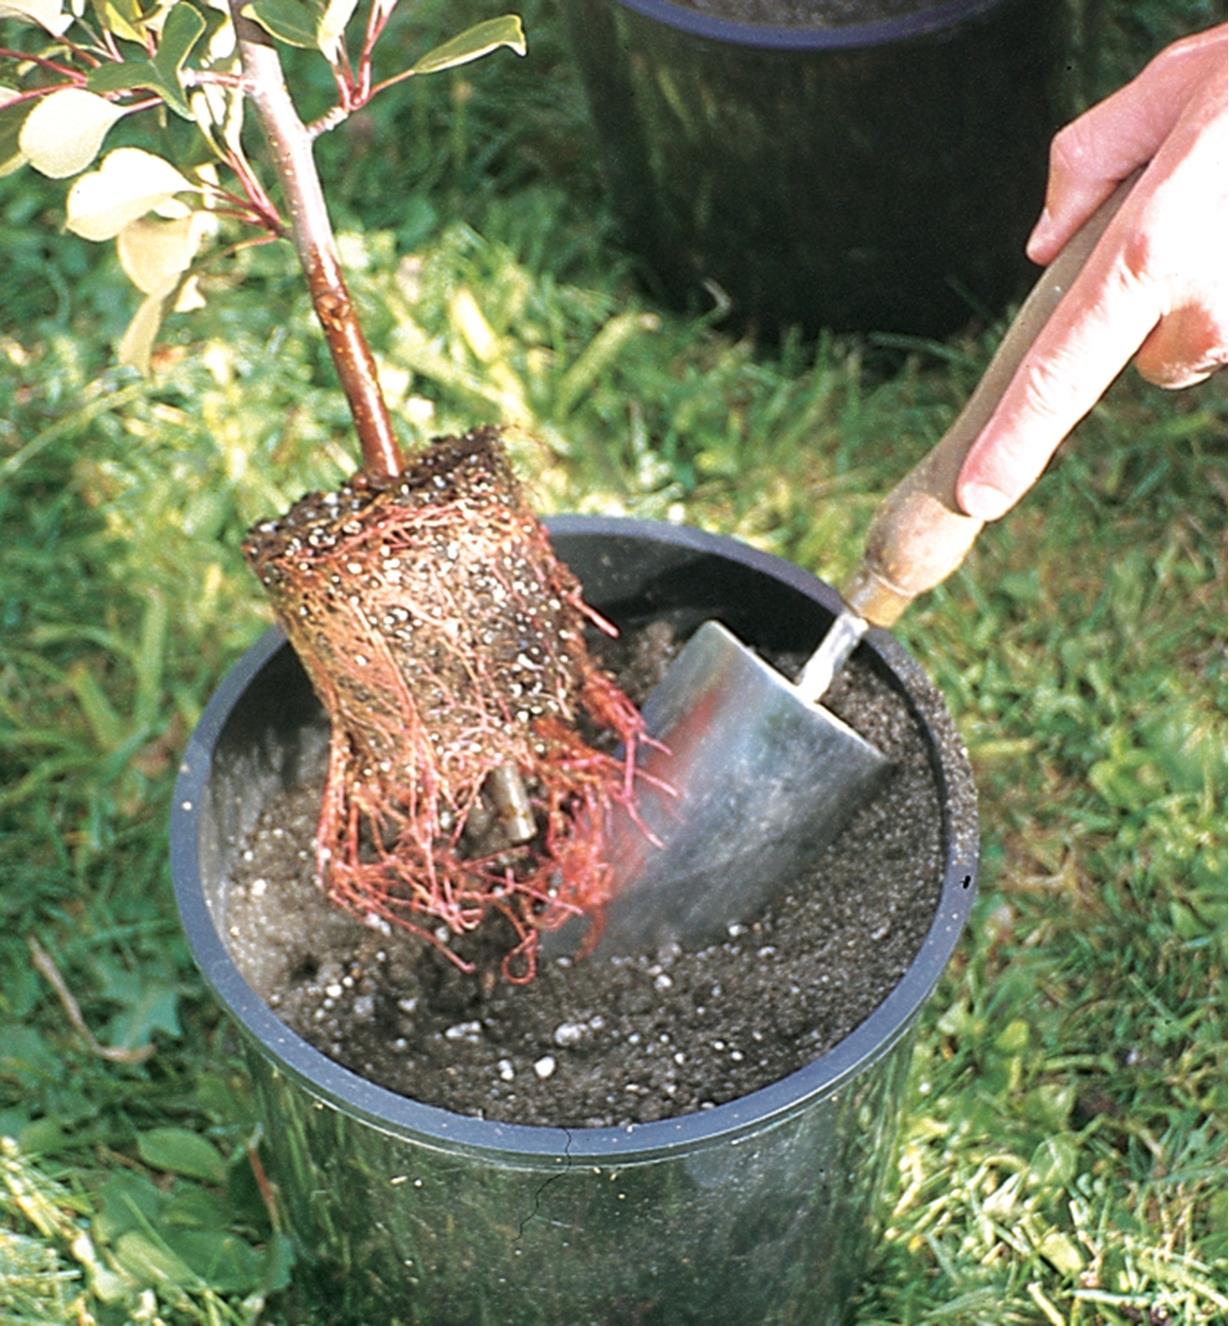 A plant being transplanted into a flowerpot